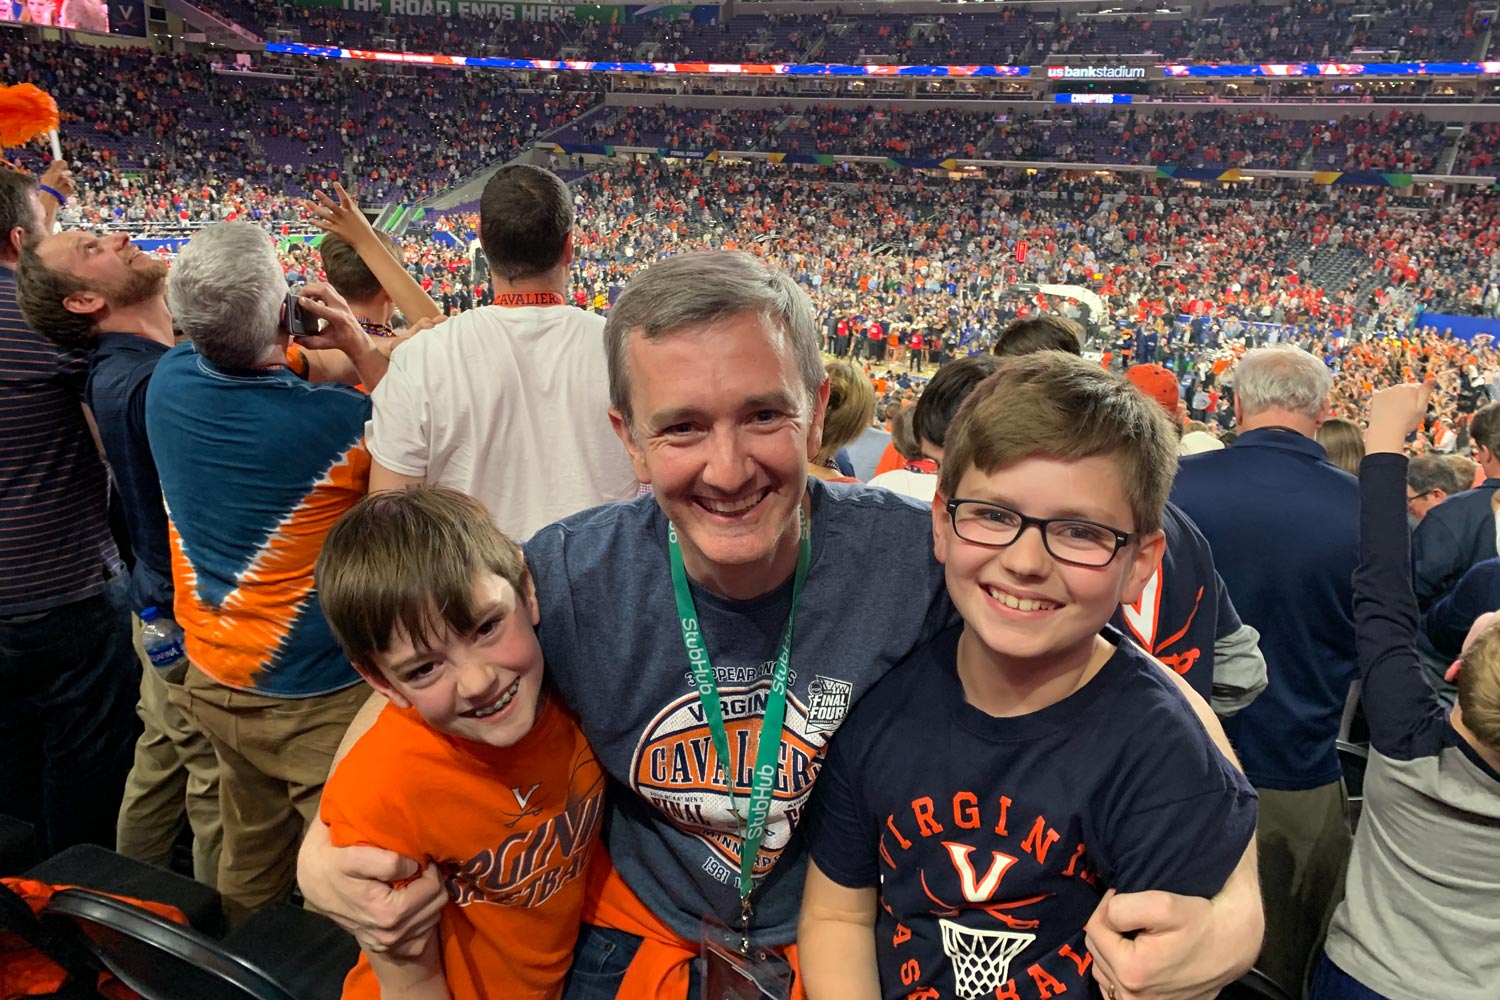  Chris Duffy, center, and his sons James and Henry pose for photo at the Final Four basketball game